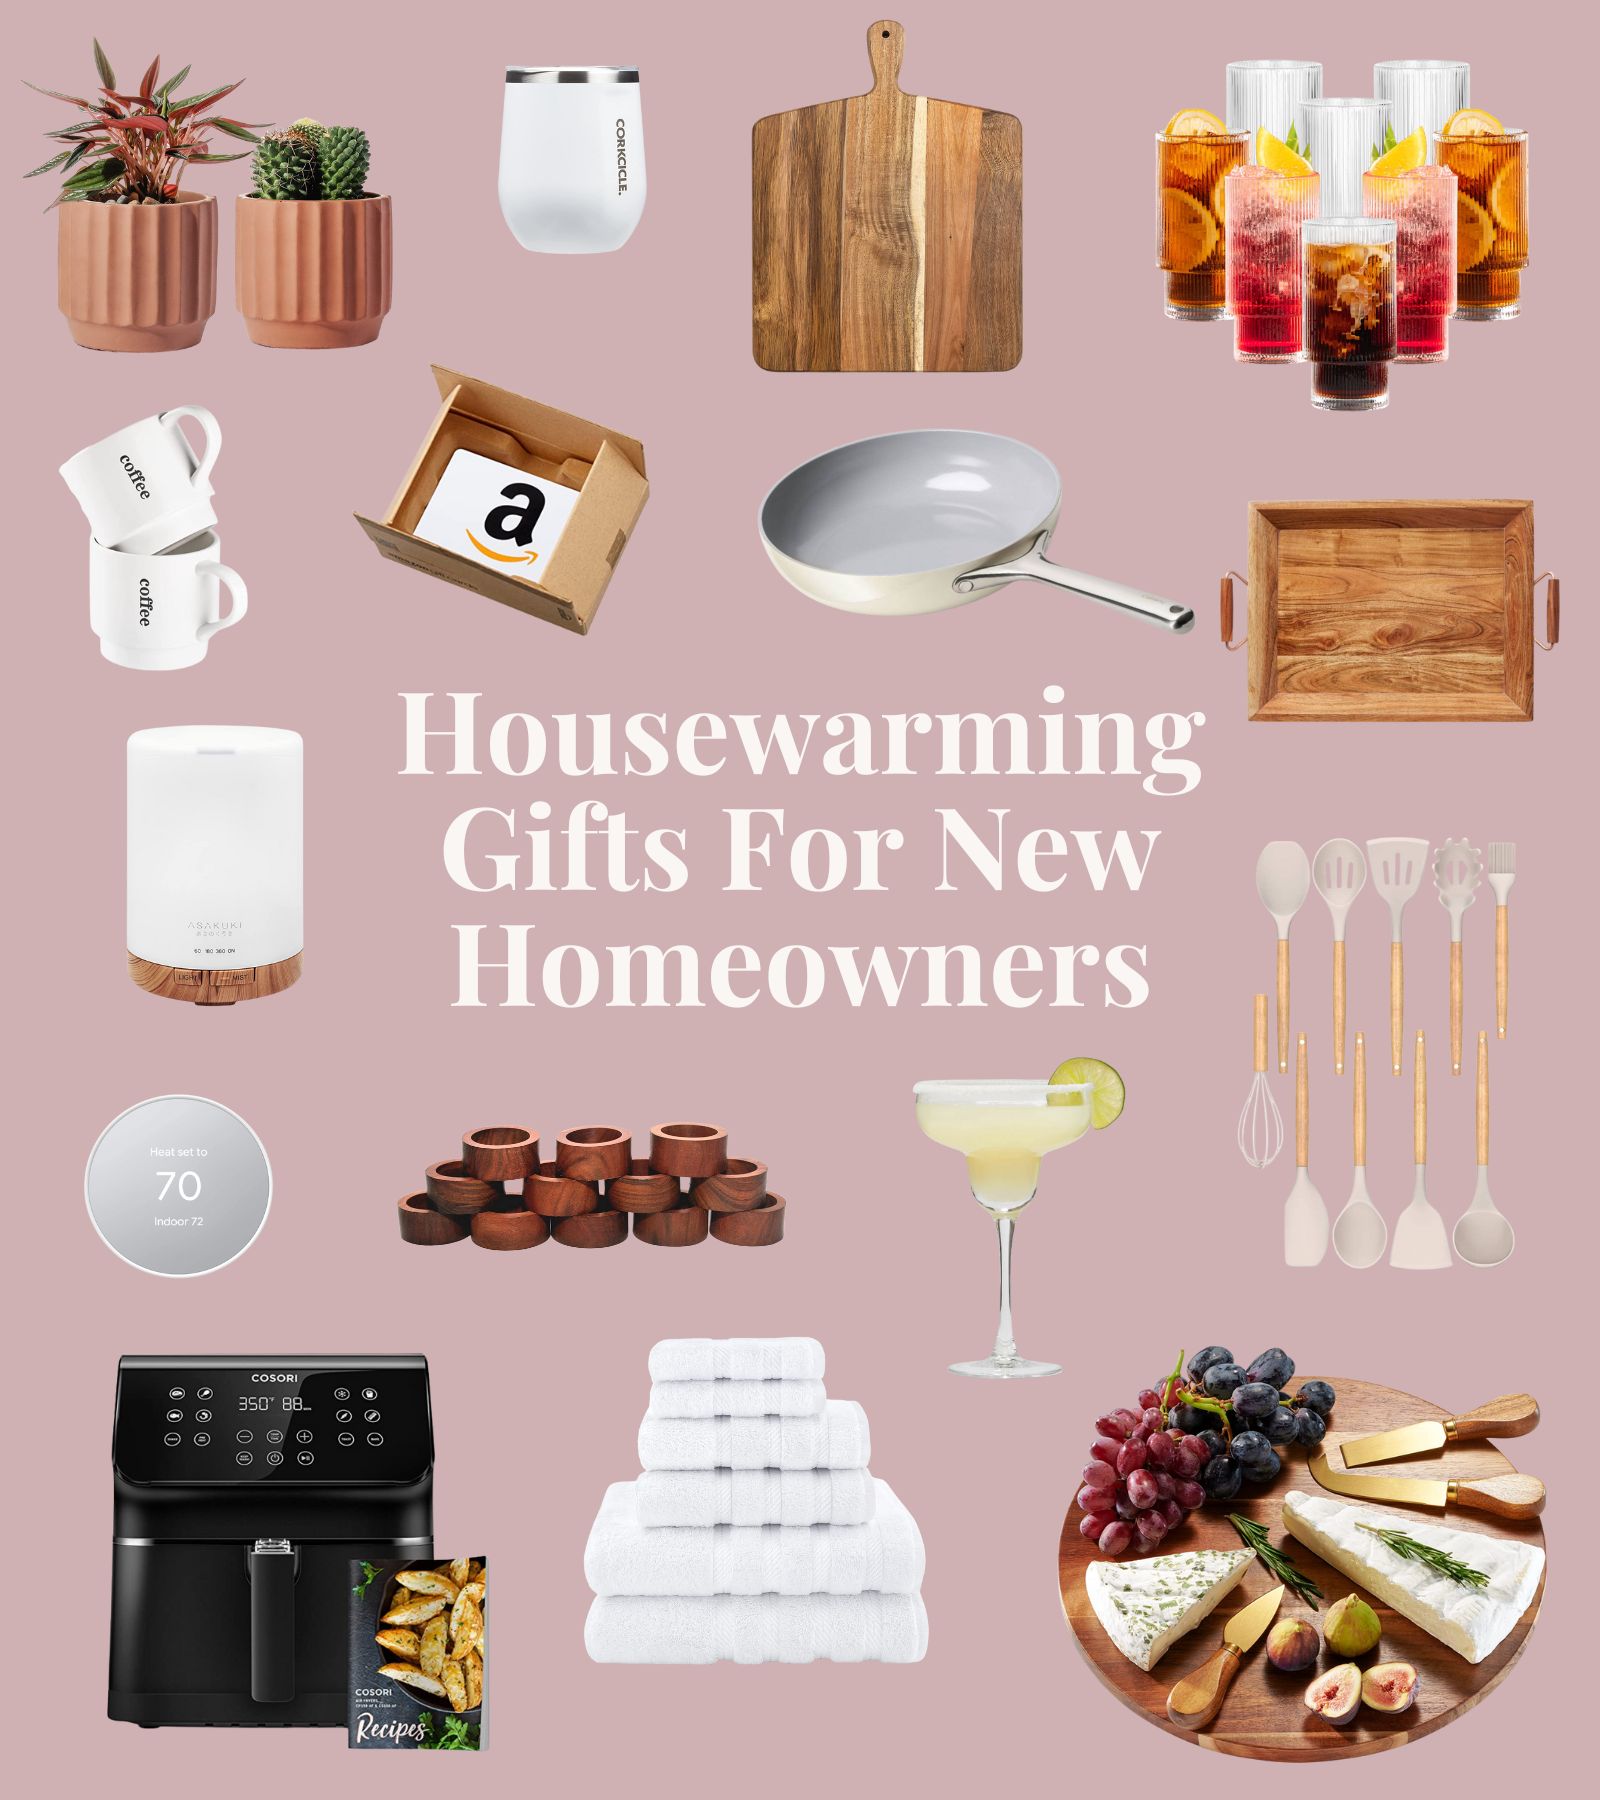 The Best Housewarming Kitchen Gifts to Make a New Home Complete |  Housewarming kitchen gifts, Kitchen gifts, House warming